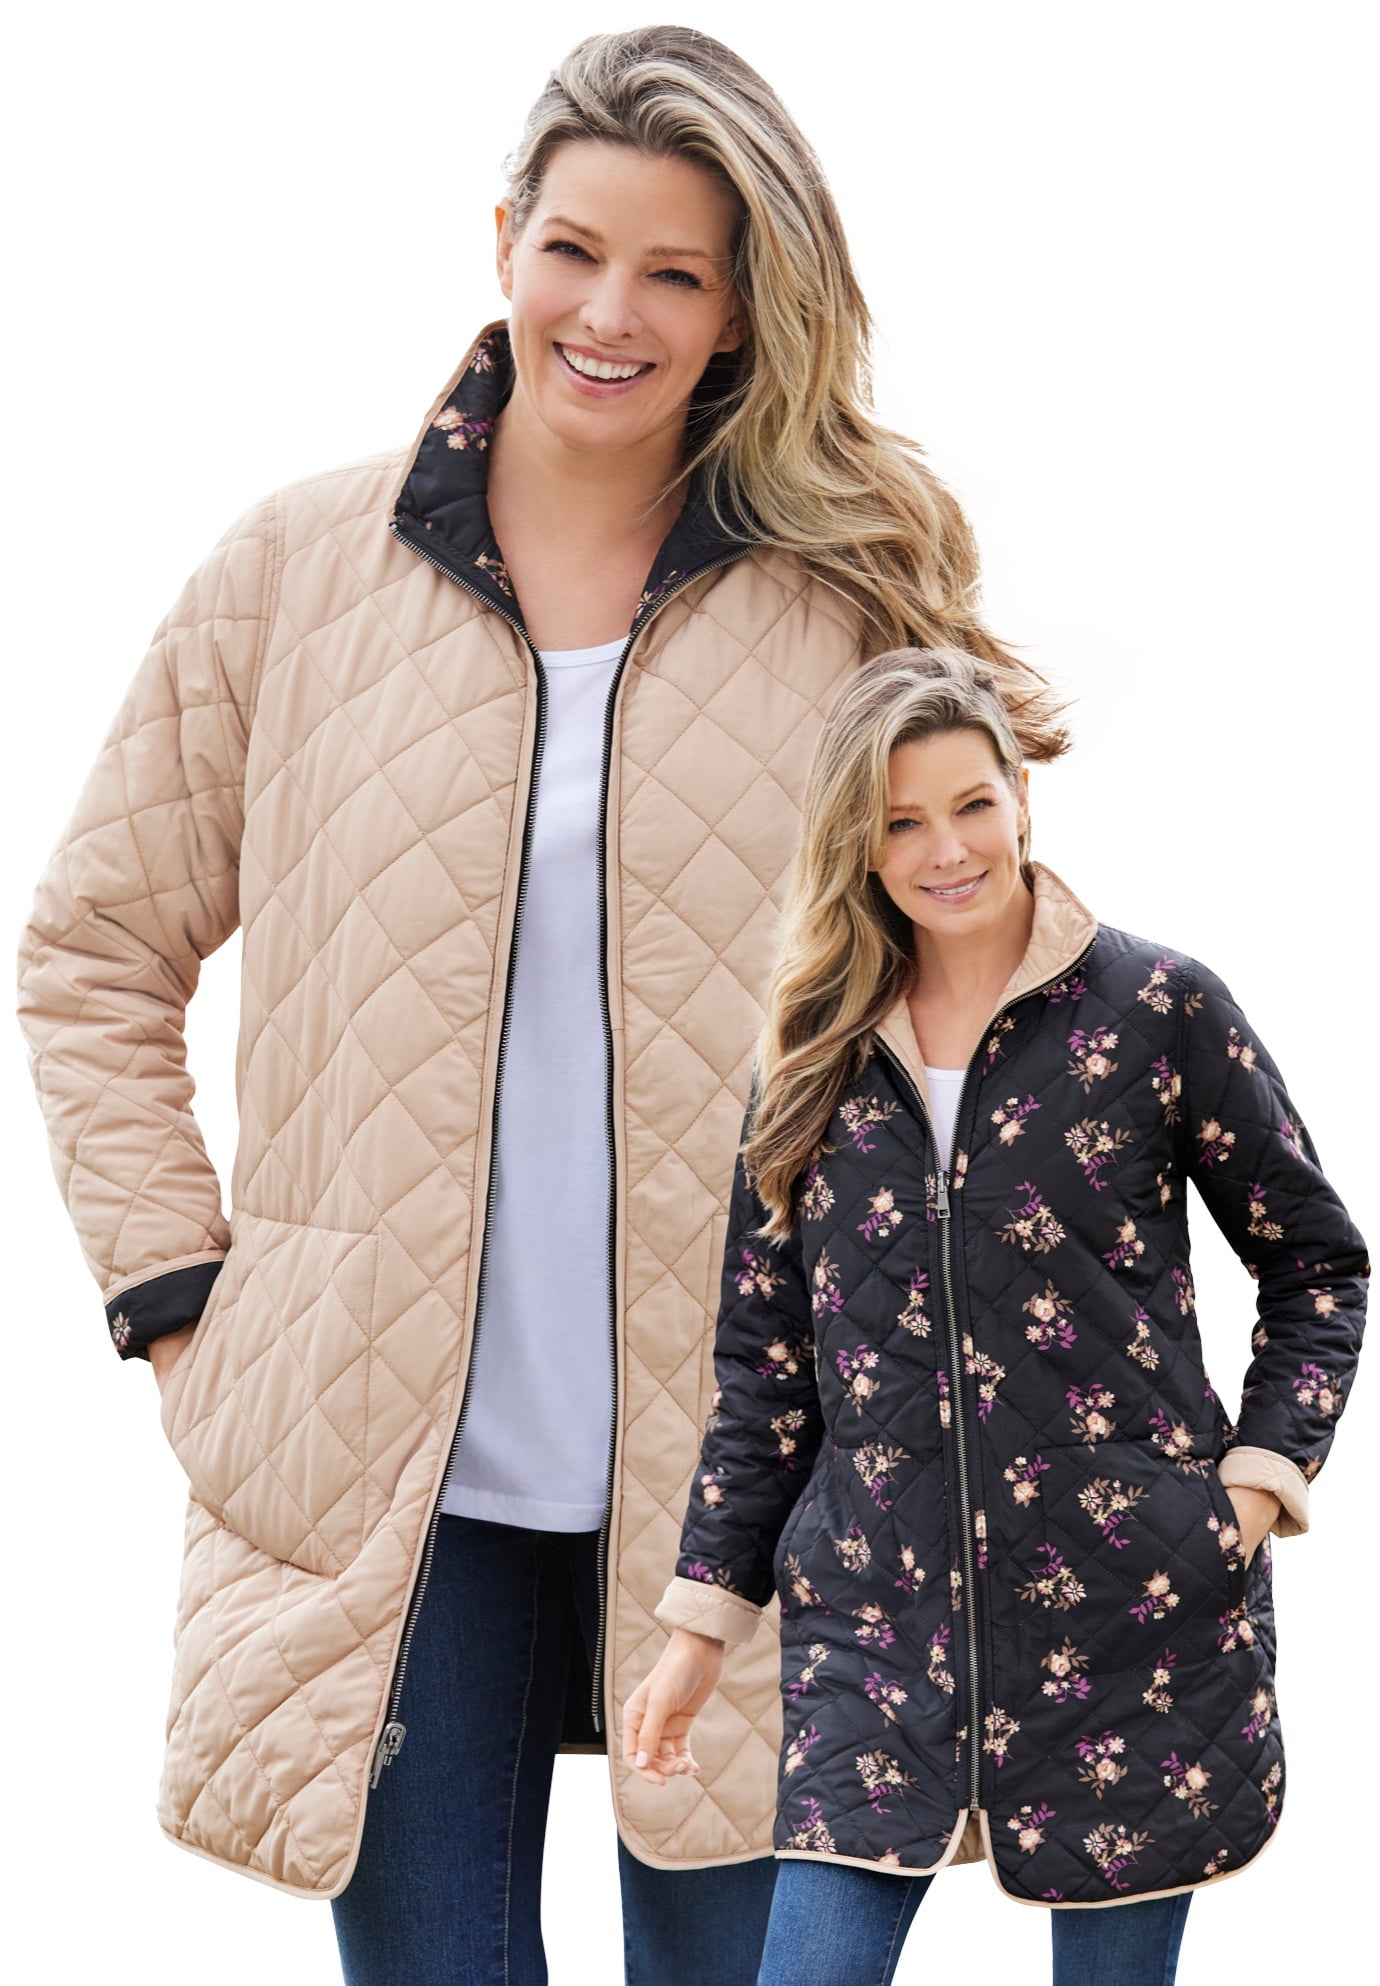 Woman Within Women's Plus Size Quilted Barn Jacket Jacket - Walmart.com